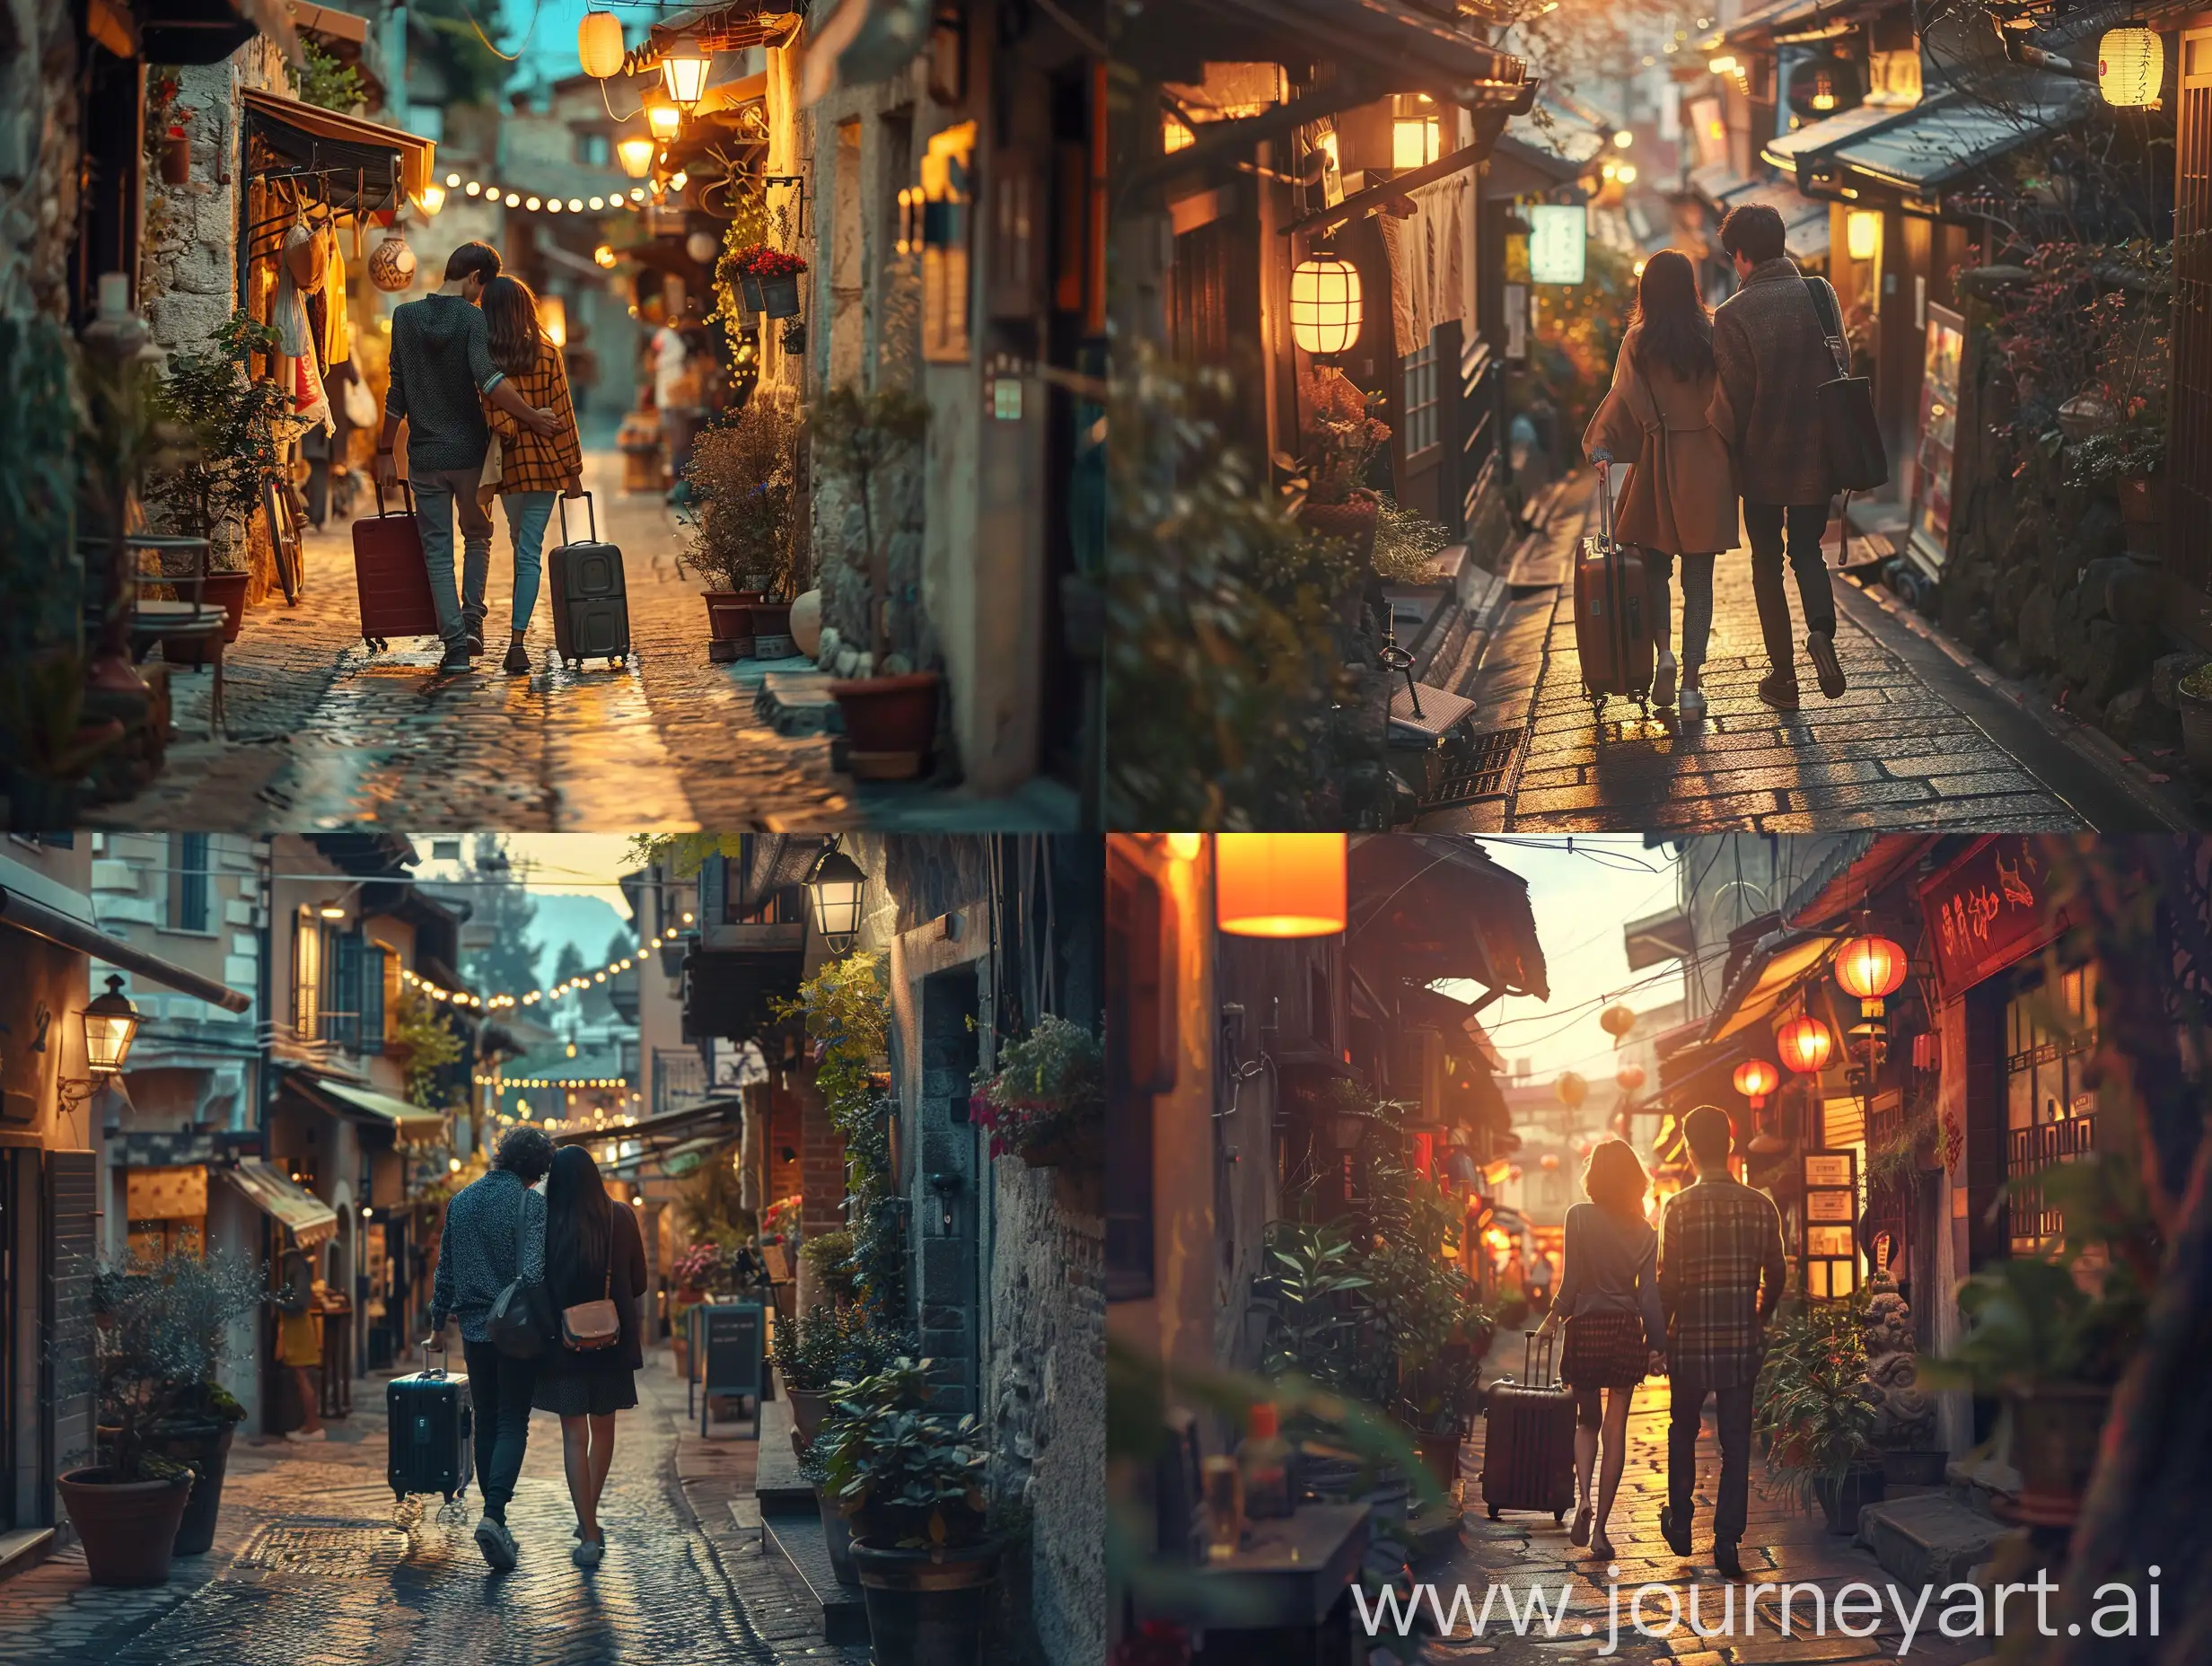 Young-Couple-Walking-Down-Warmly-Lit-Street-at-Dusk